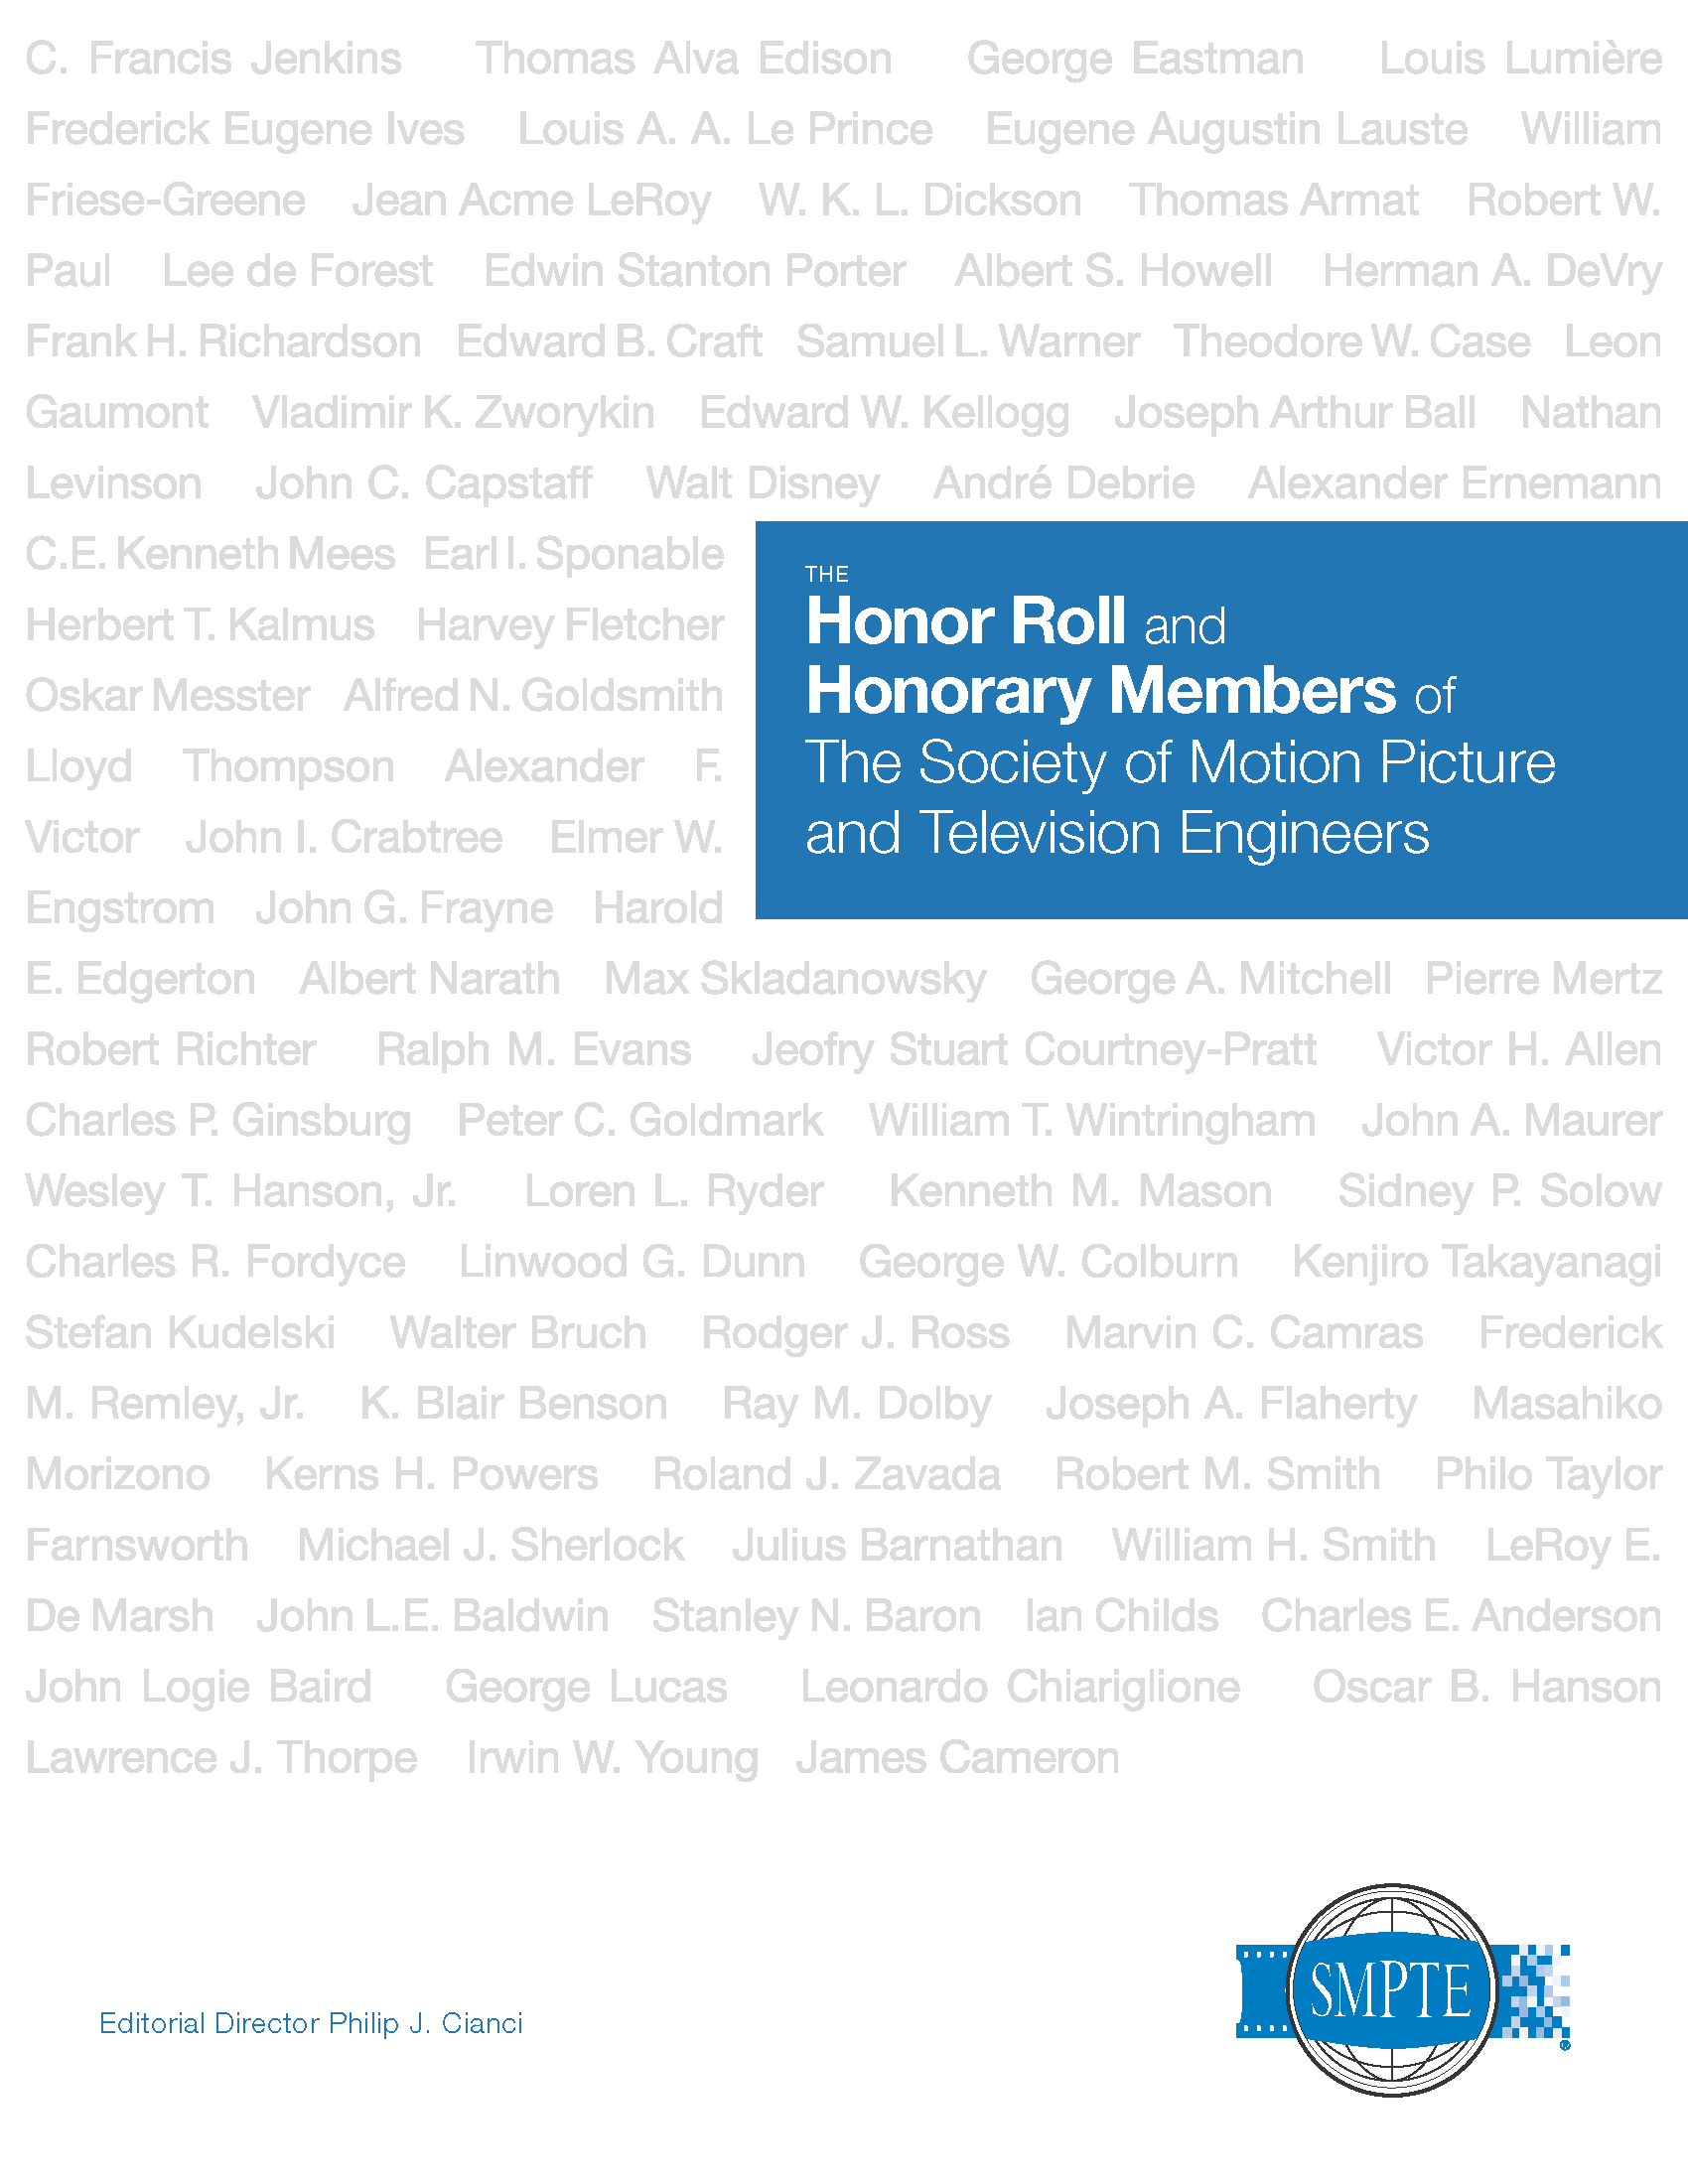 "The Honor Roll and Honorary Members of the Society of Motion Picture and Television Engineers" is a limited-edition book showcasing the industry leaders and innovators who have contributed their tale